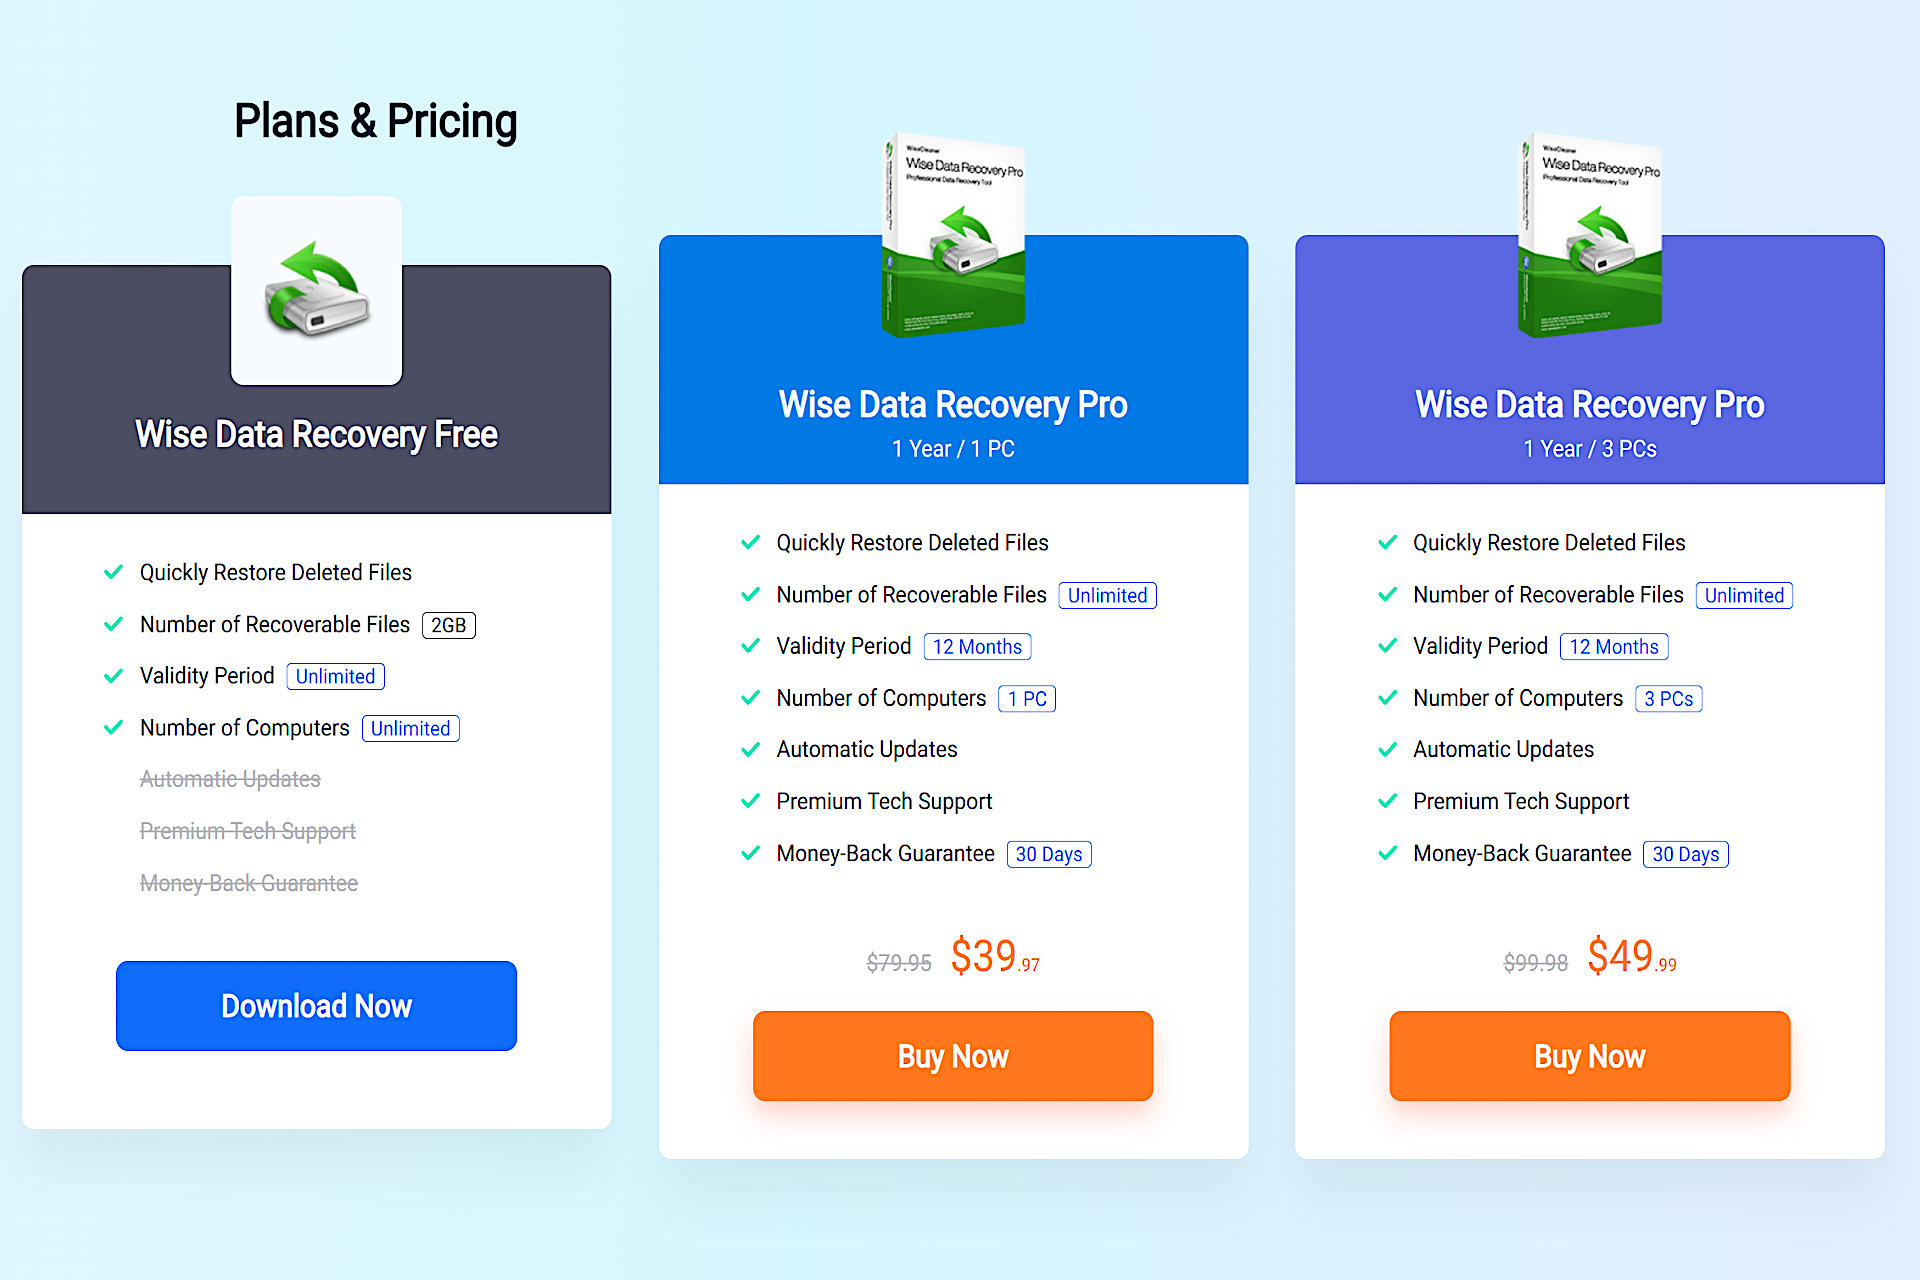 Wise Data Recovery Pro has free and paid versions.